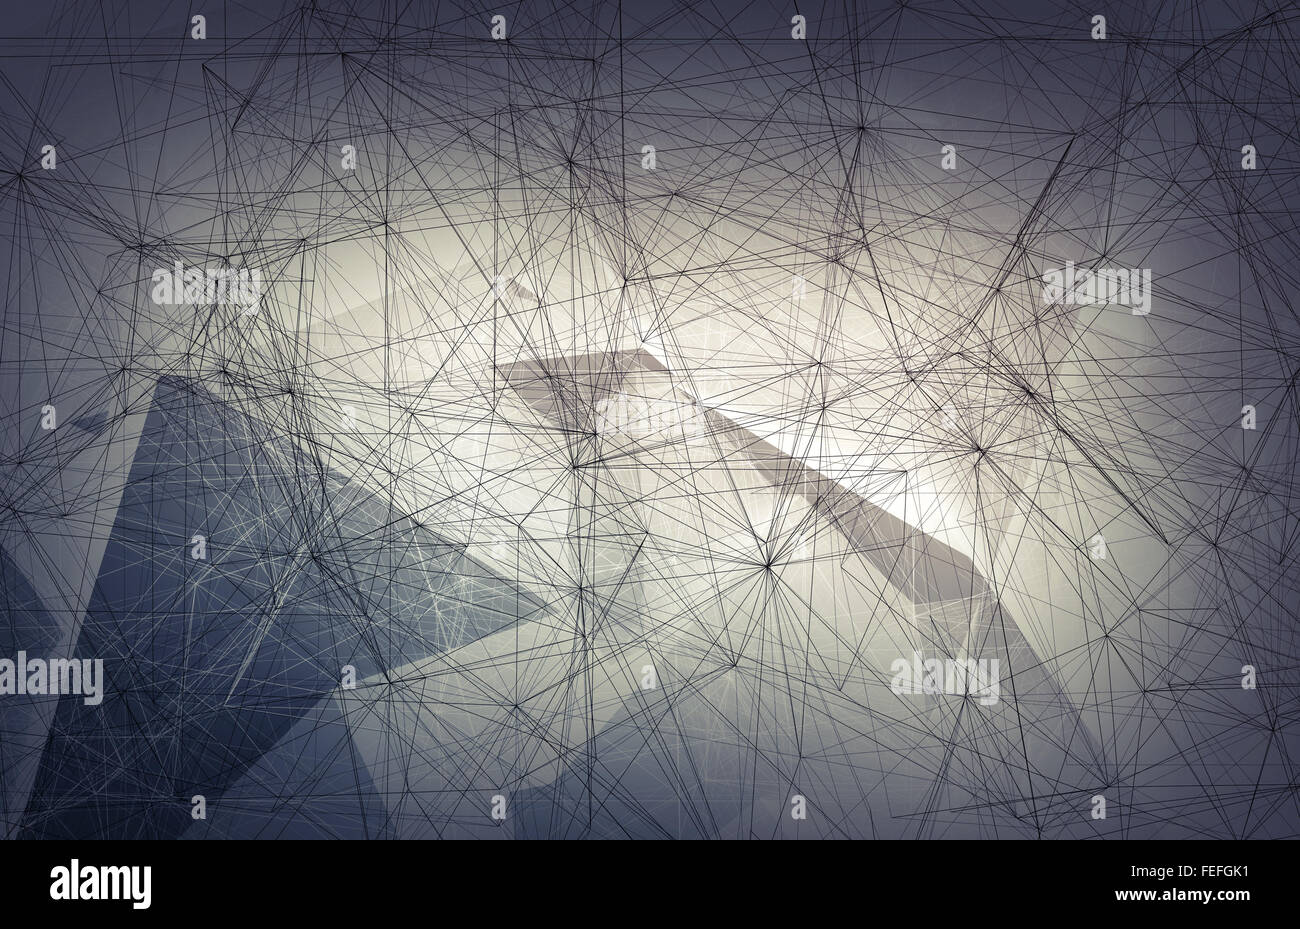 Abstract digital background with wire-frame mesh over gray polygonal background, 3d illustration Stock Photo